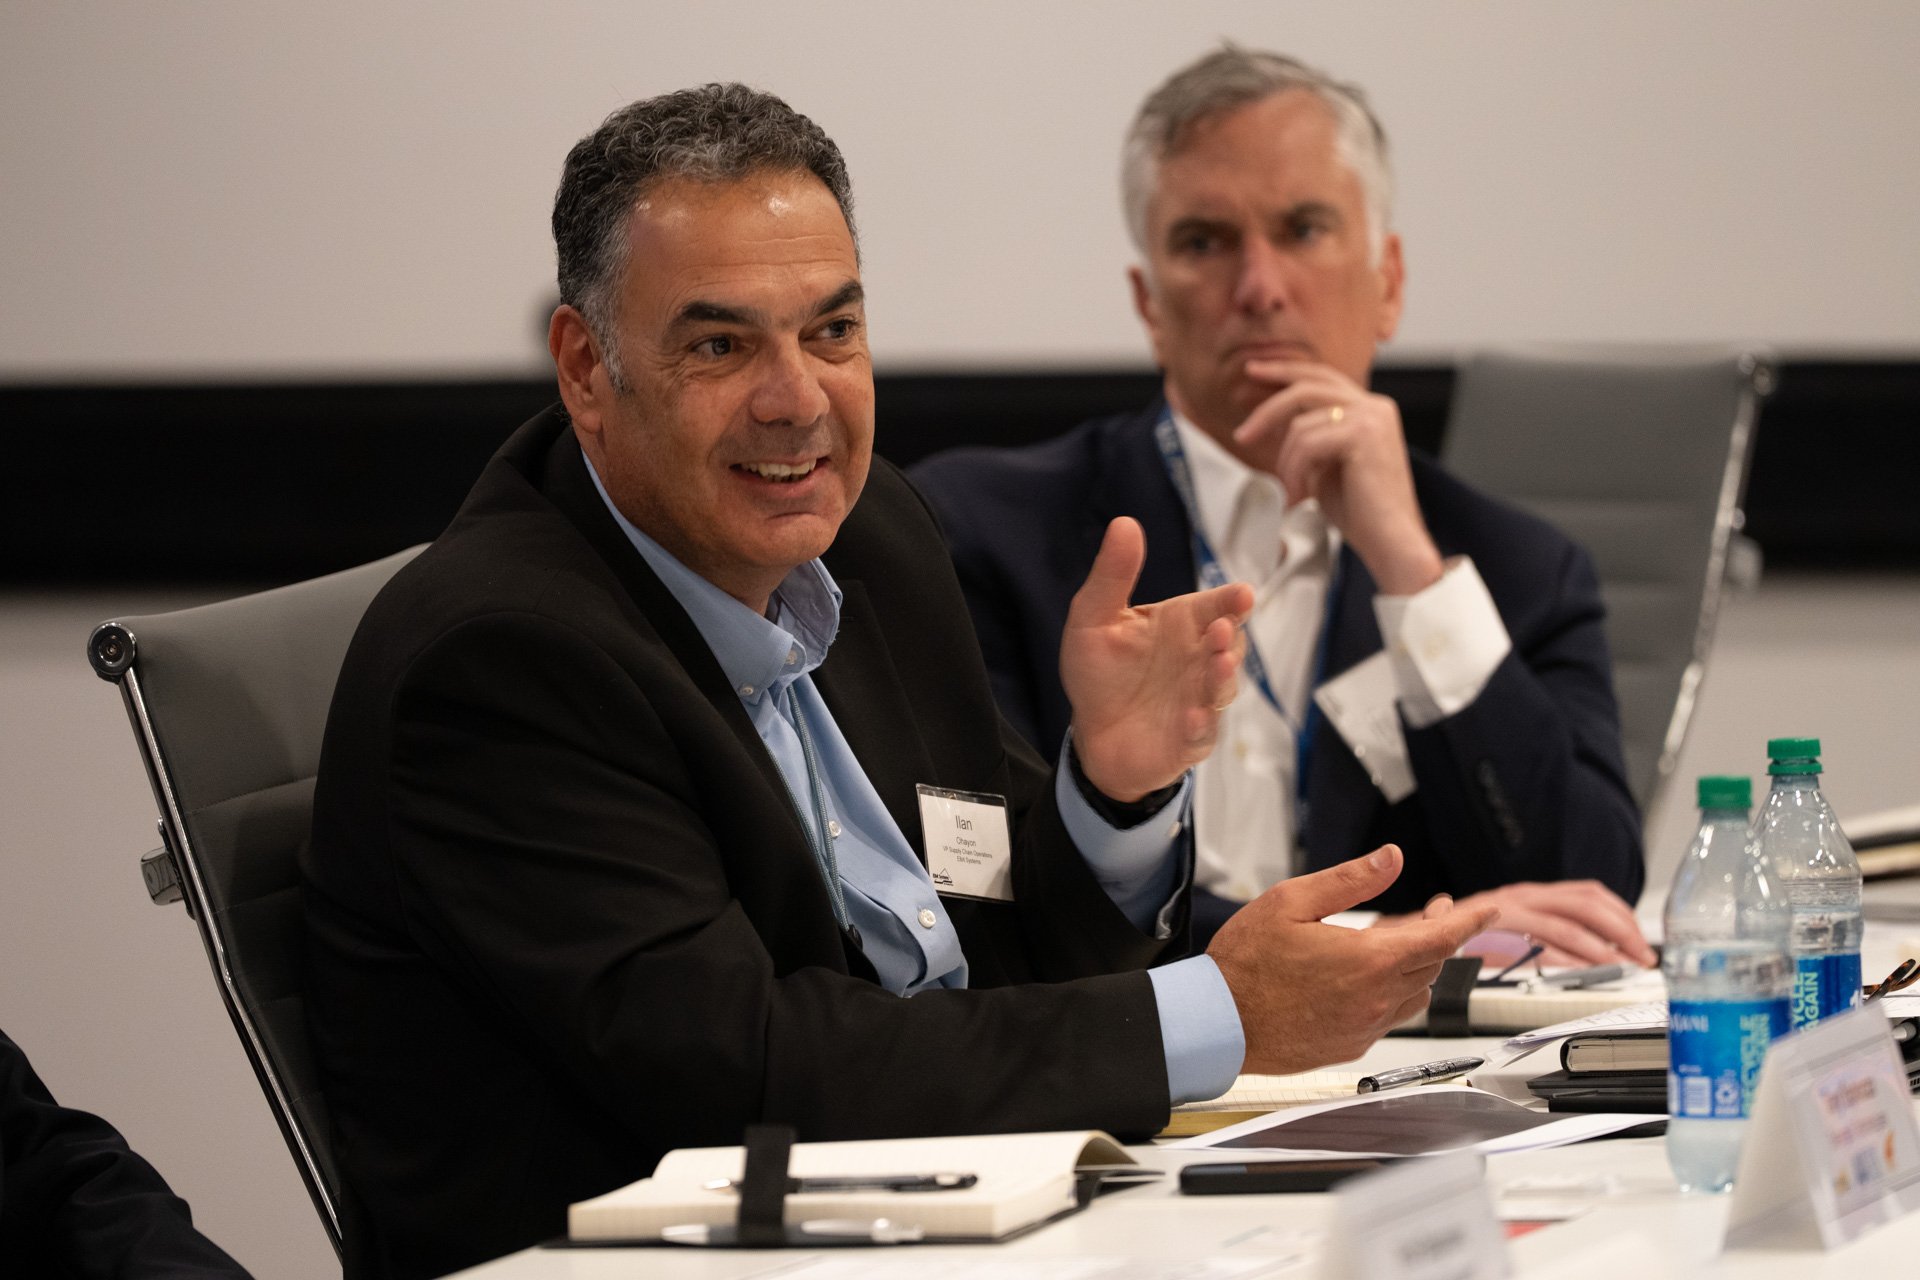 AIA, Elbit America highlight small and medium companies at supply chain policy roundtable in Fort Worth, Texas